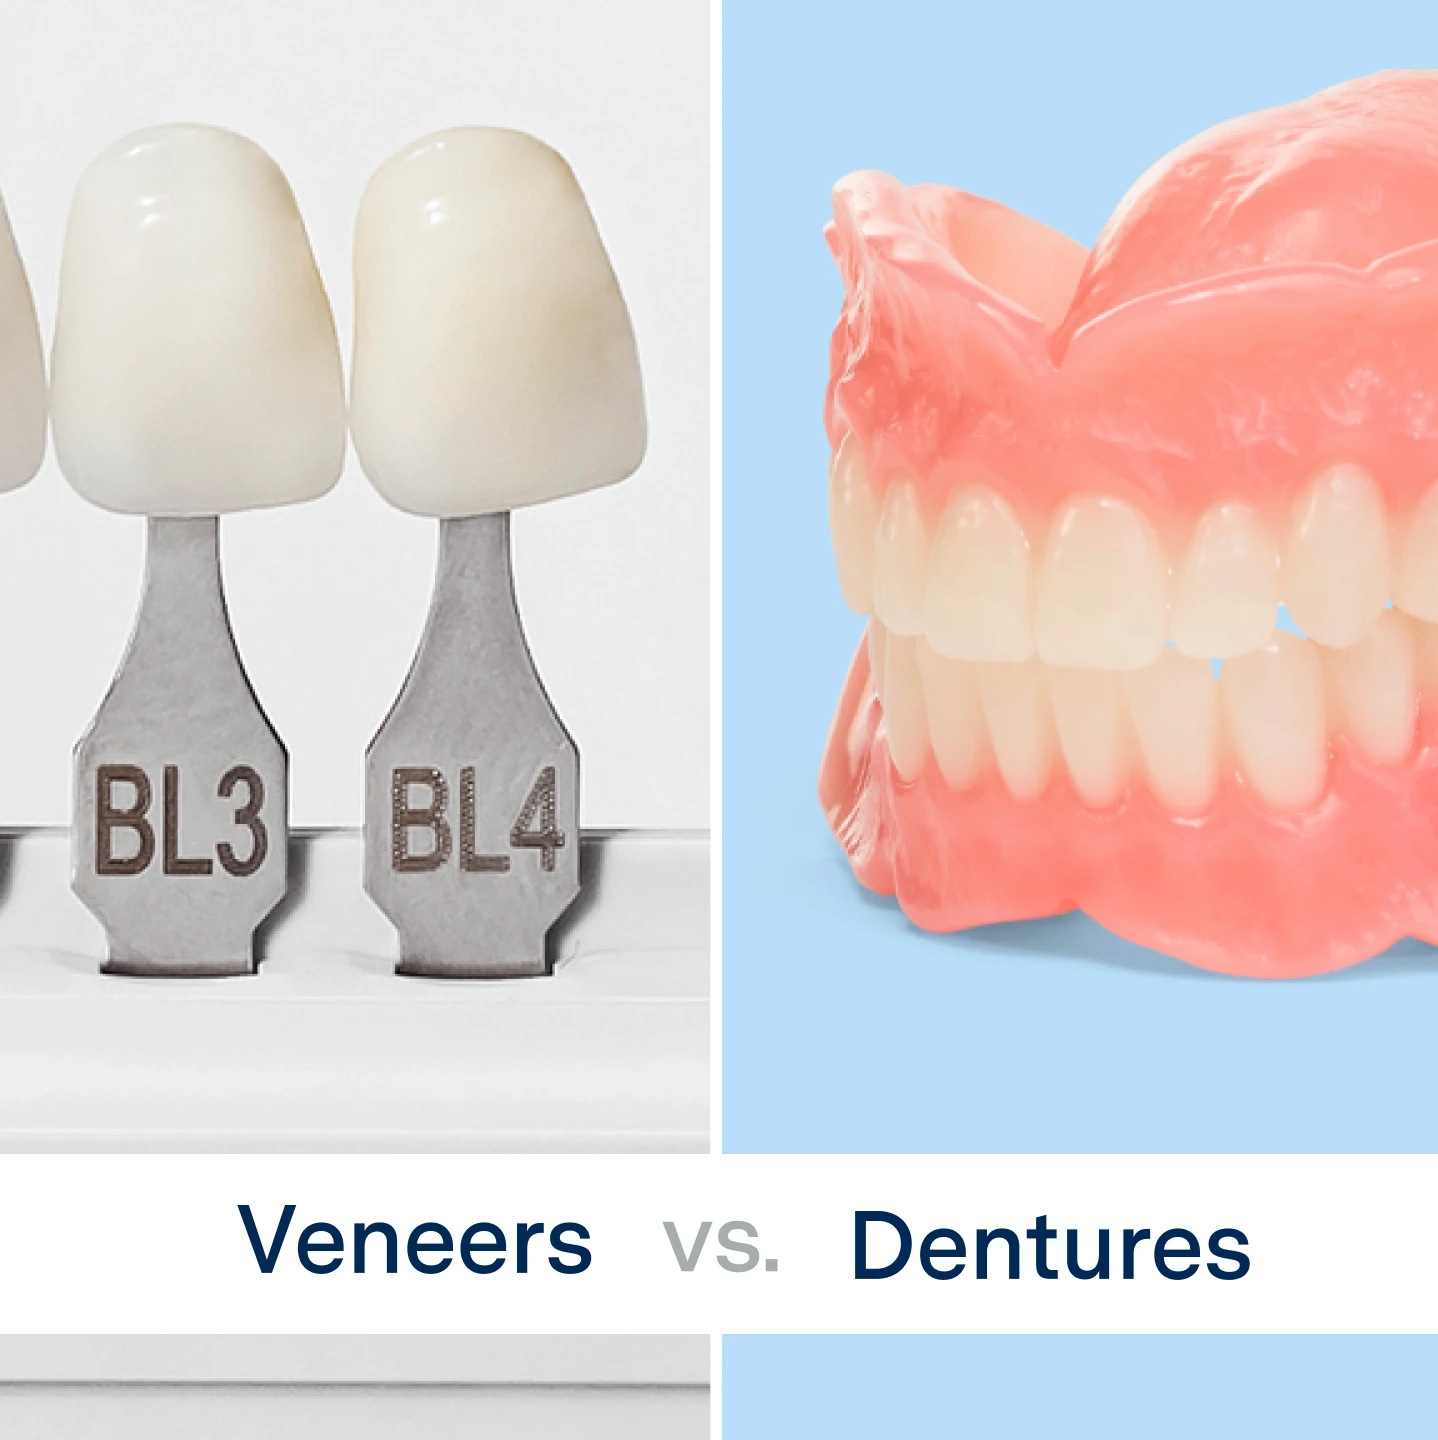 Image divided into two halves: Left side displaying various veneer options, and the right side featuring dentures. A visual guide to dental solutions for smile enhancement and restoration.